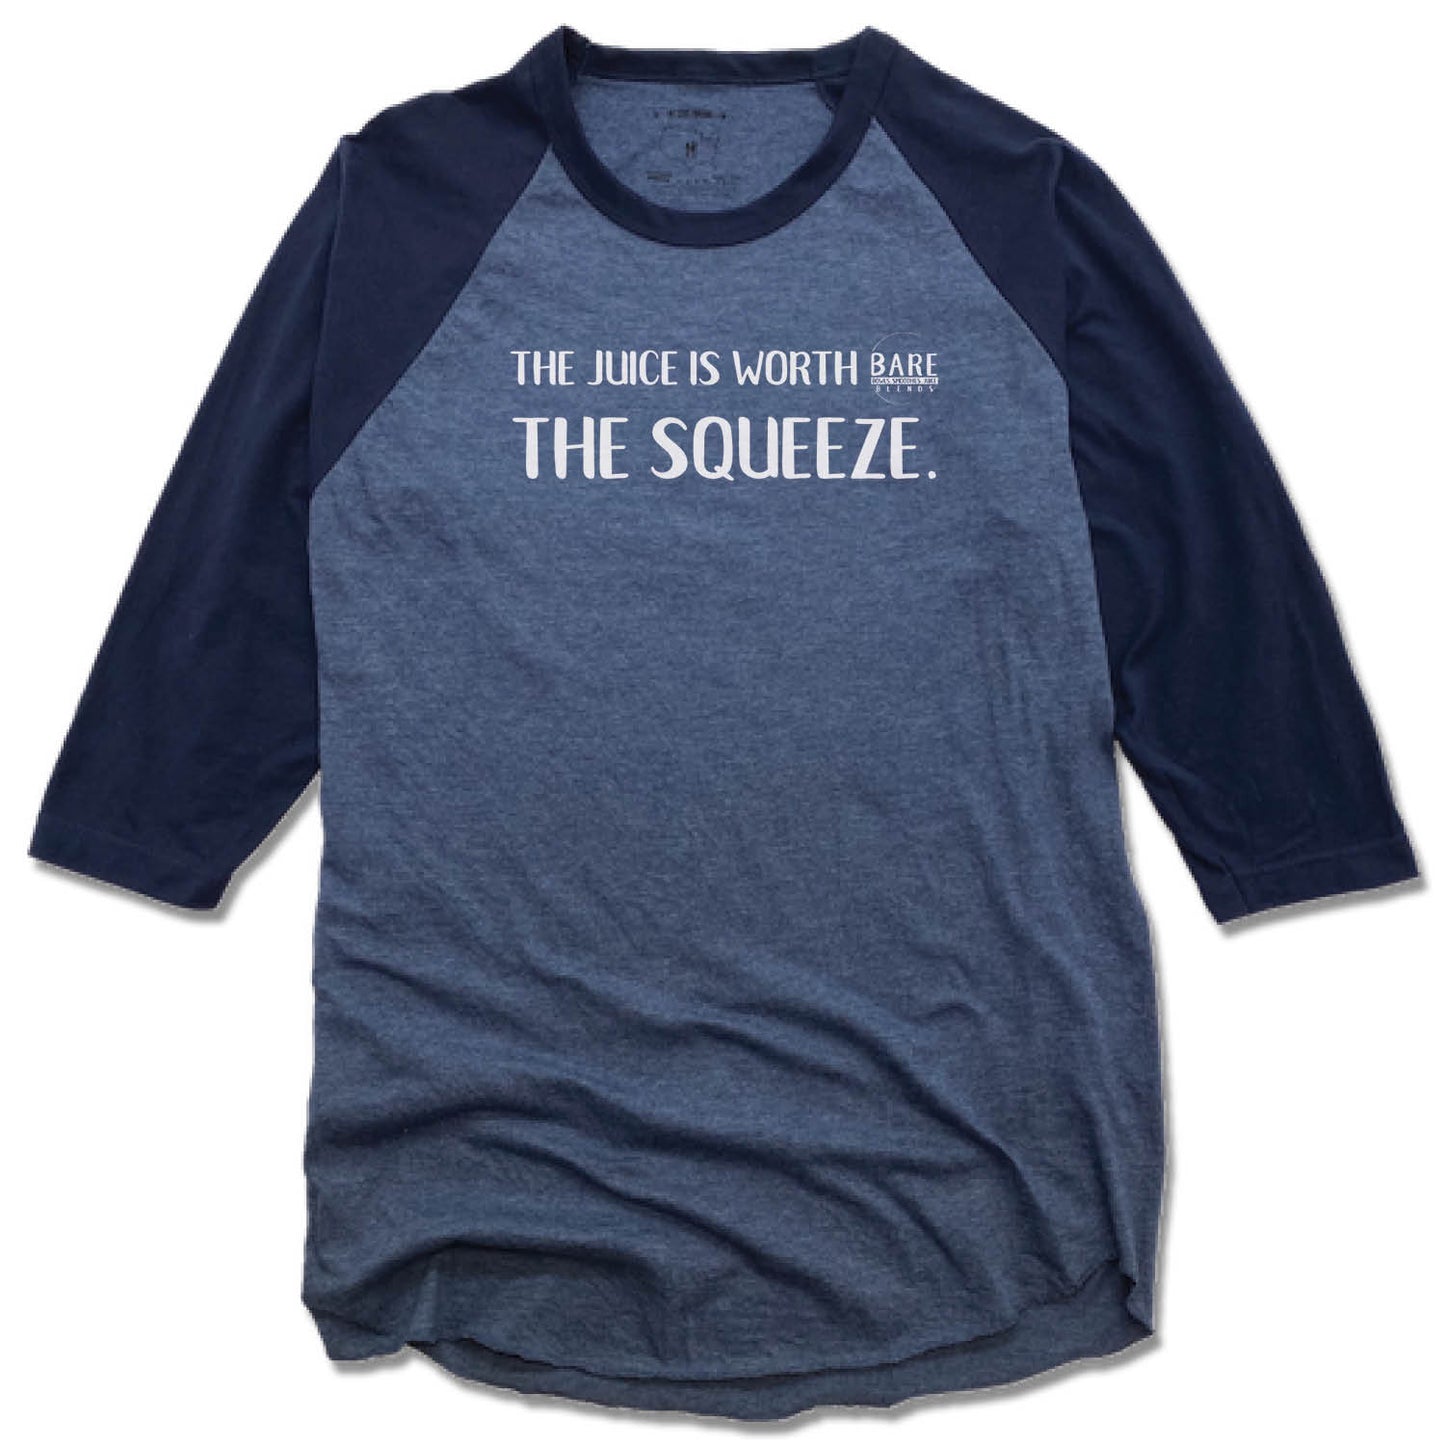 BARE BLENDS | DENIM/NAVY 3/4 SLEEVE | THE SQUEEZE WHITE LOGO